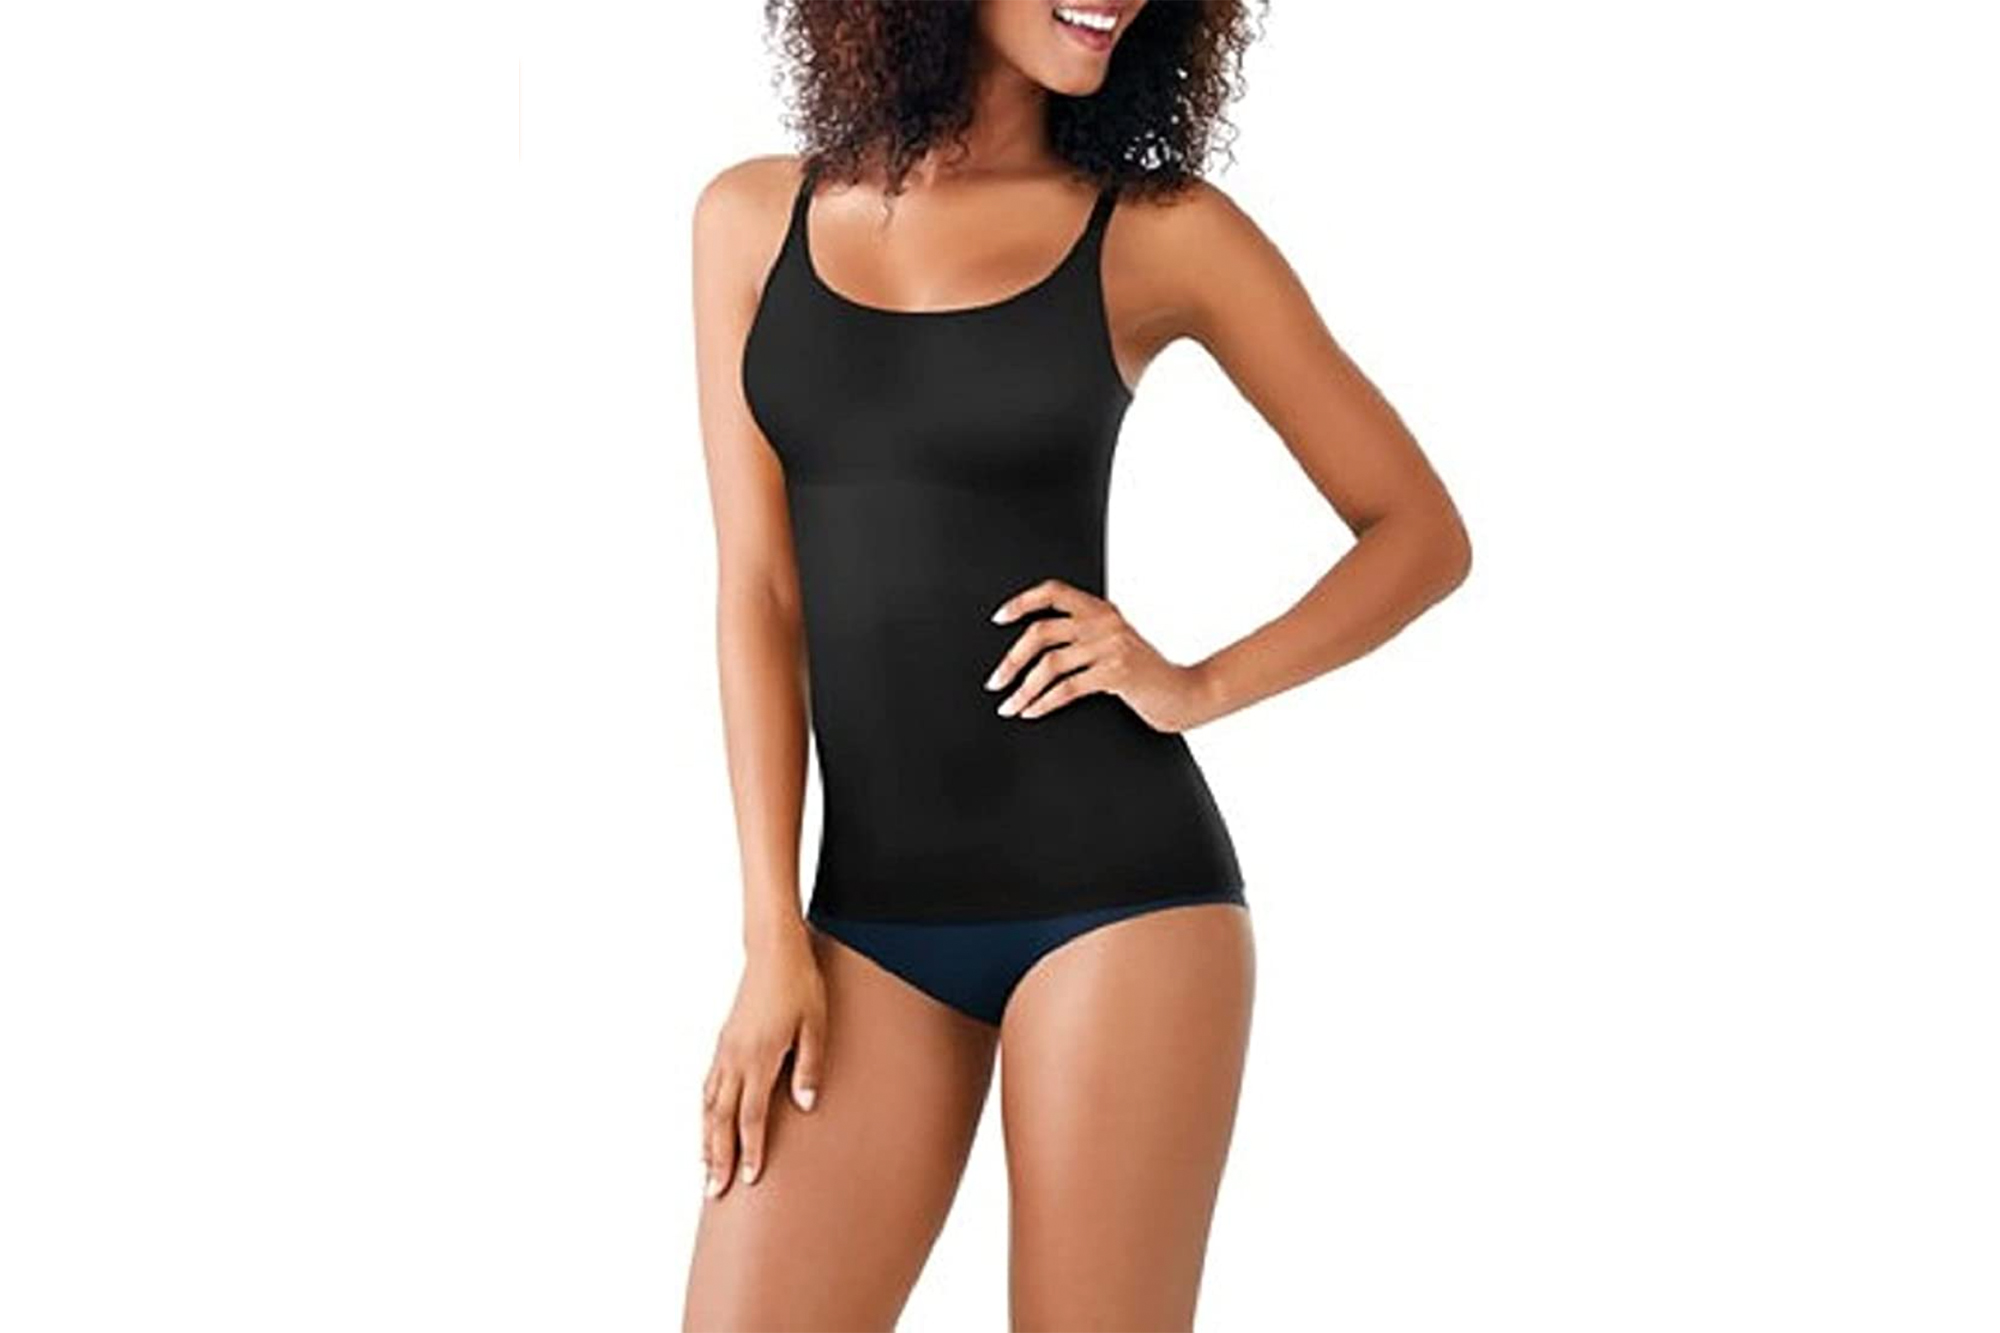 Maidenform Tank Top Is the Perfect Alternative to Wearing a